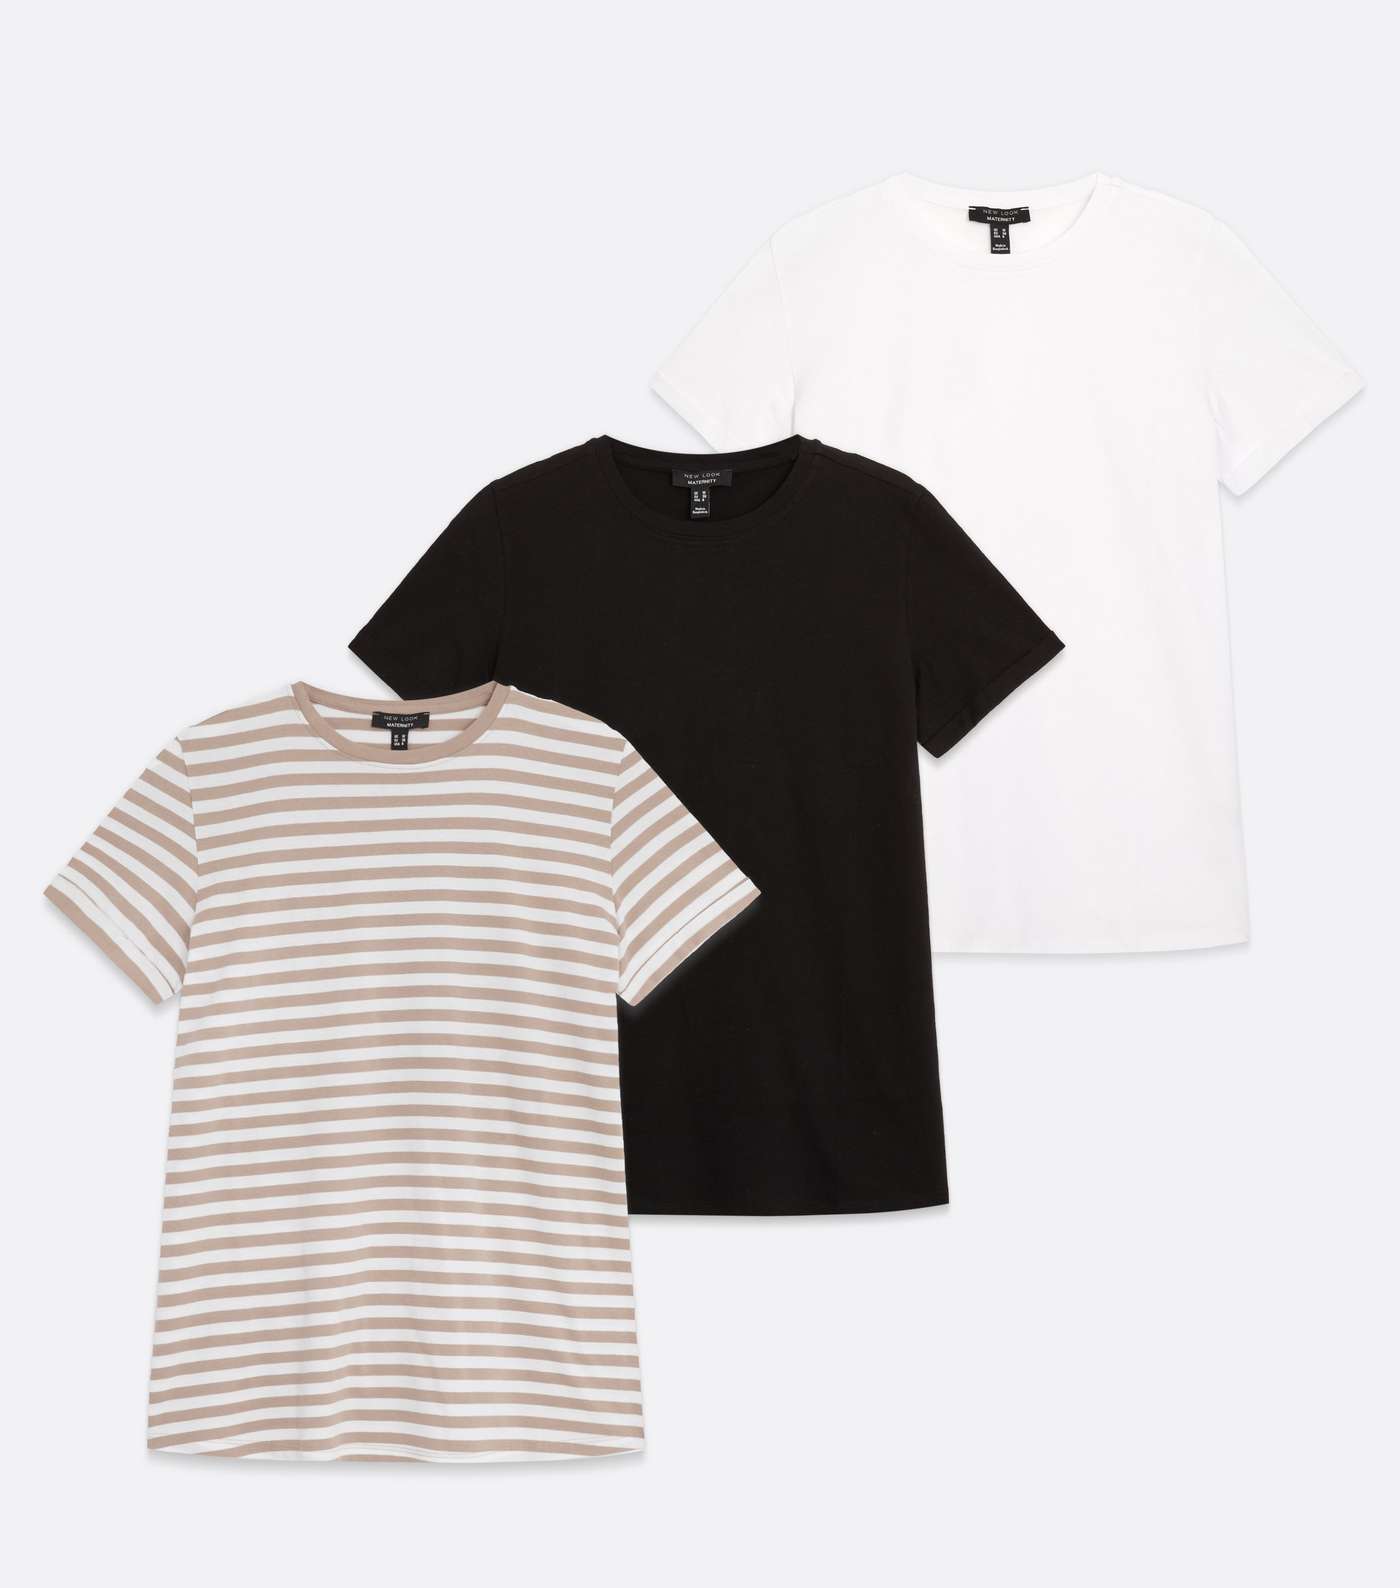 Maternity 3 Pack Black White and Brown Stripe Crew T-Shirts Image 5